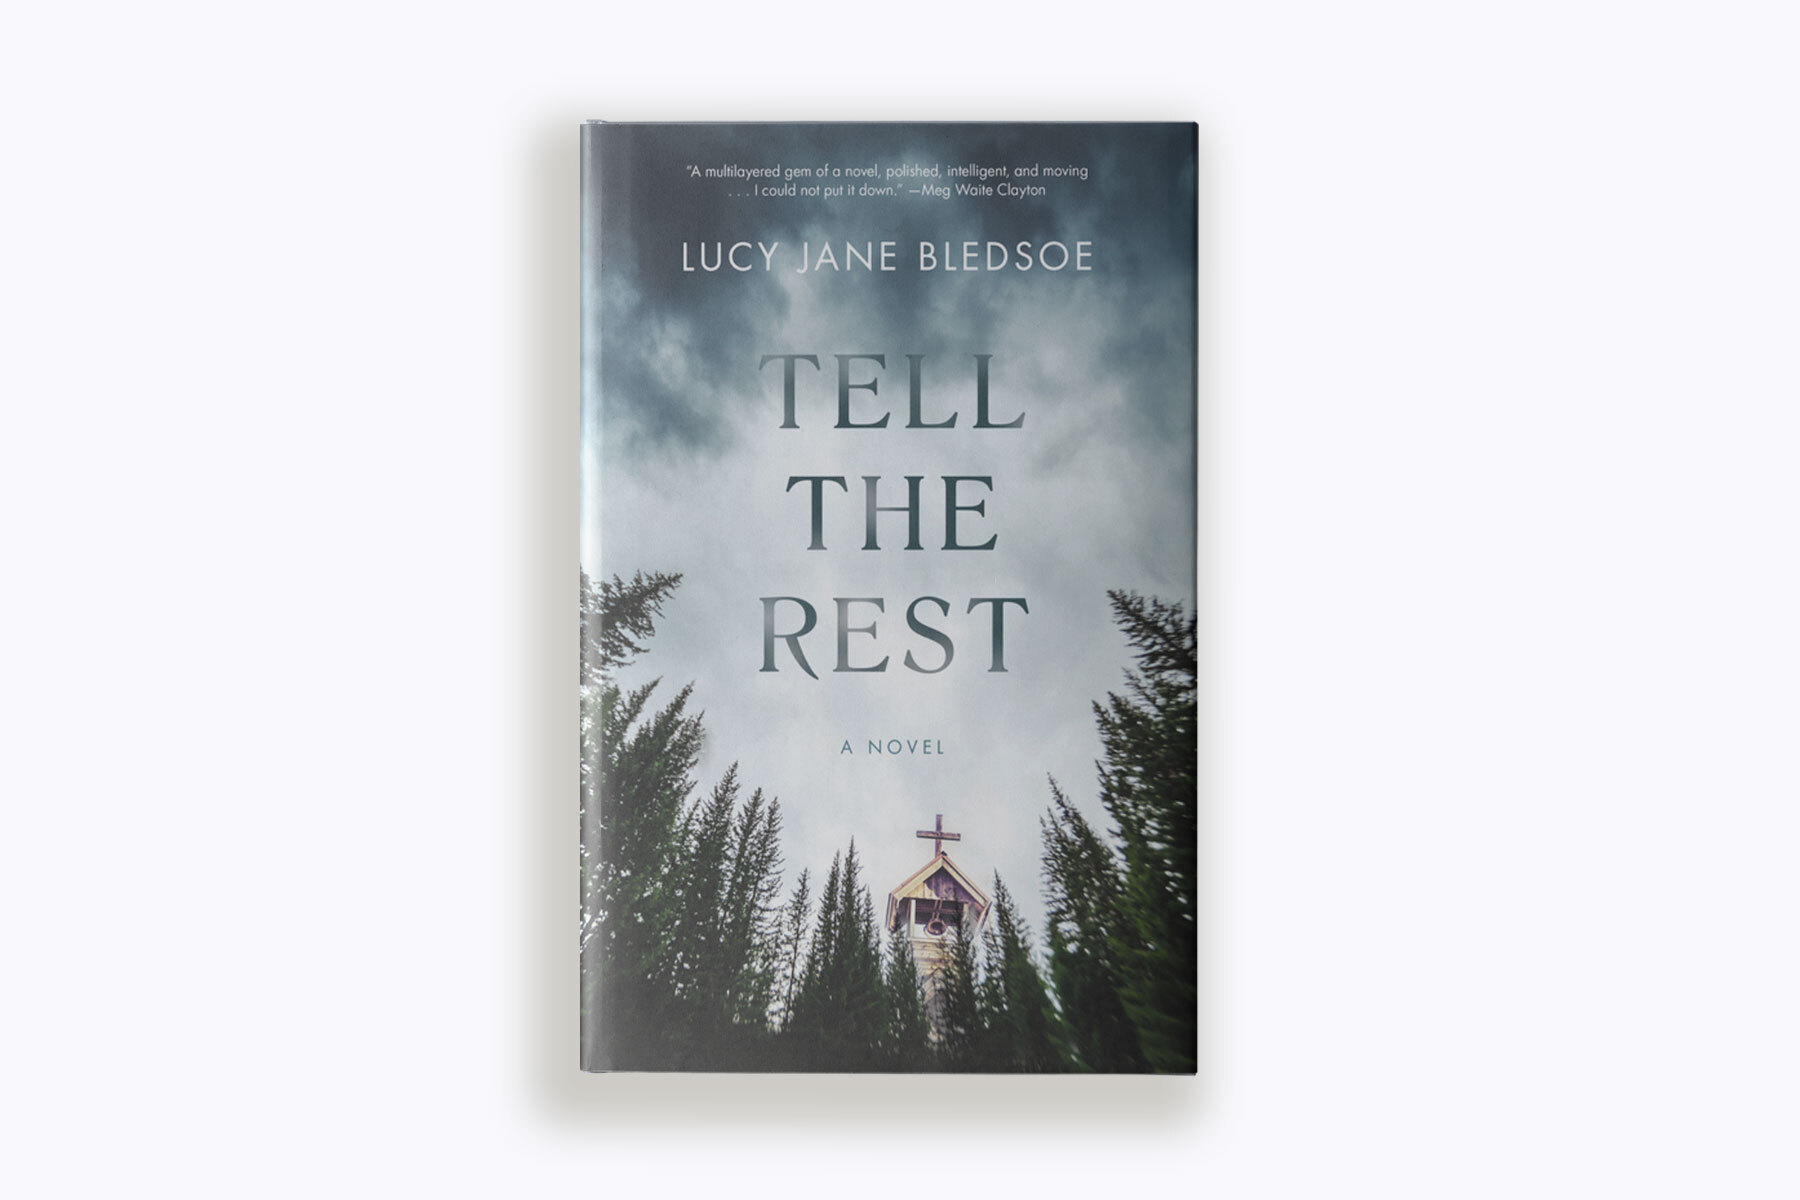 Lucy Jane Bledsoe's book "Tell The Rest"